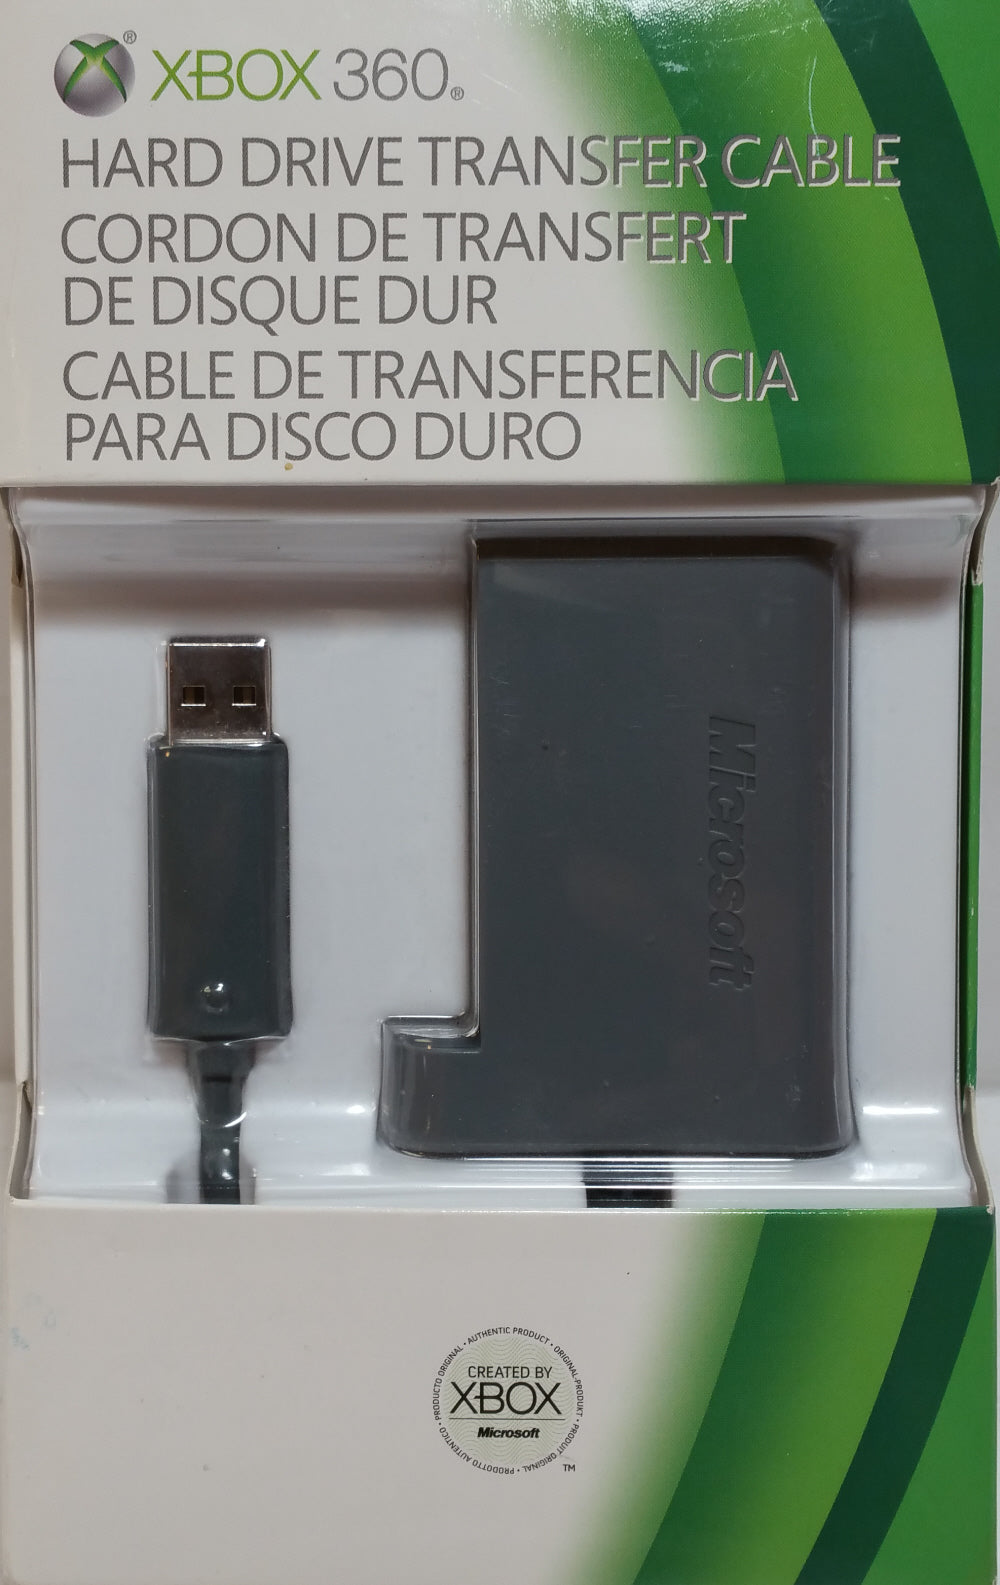 Xbox 360 Data Transfer Cable - Masolut Superstore